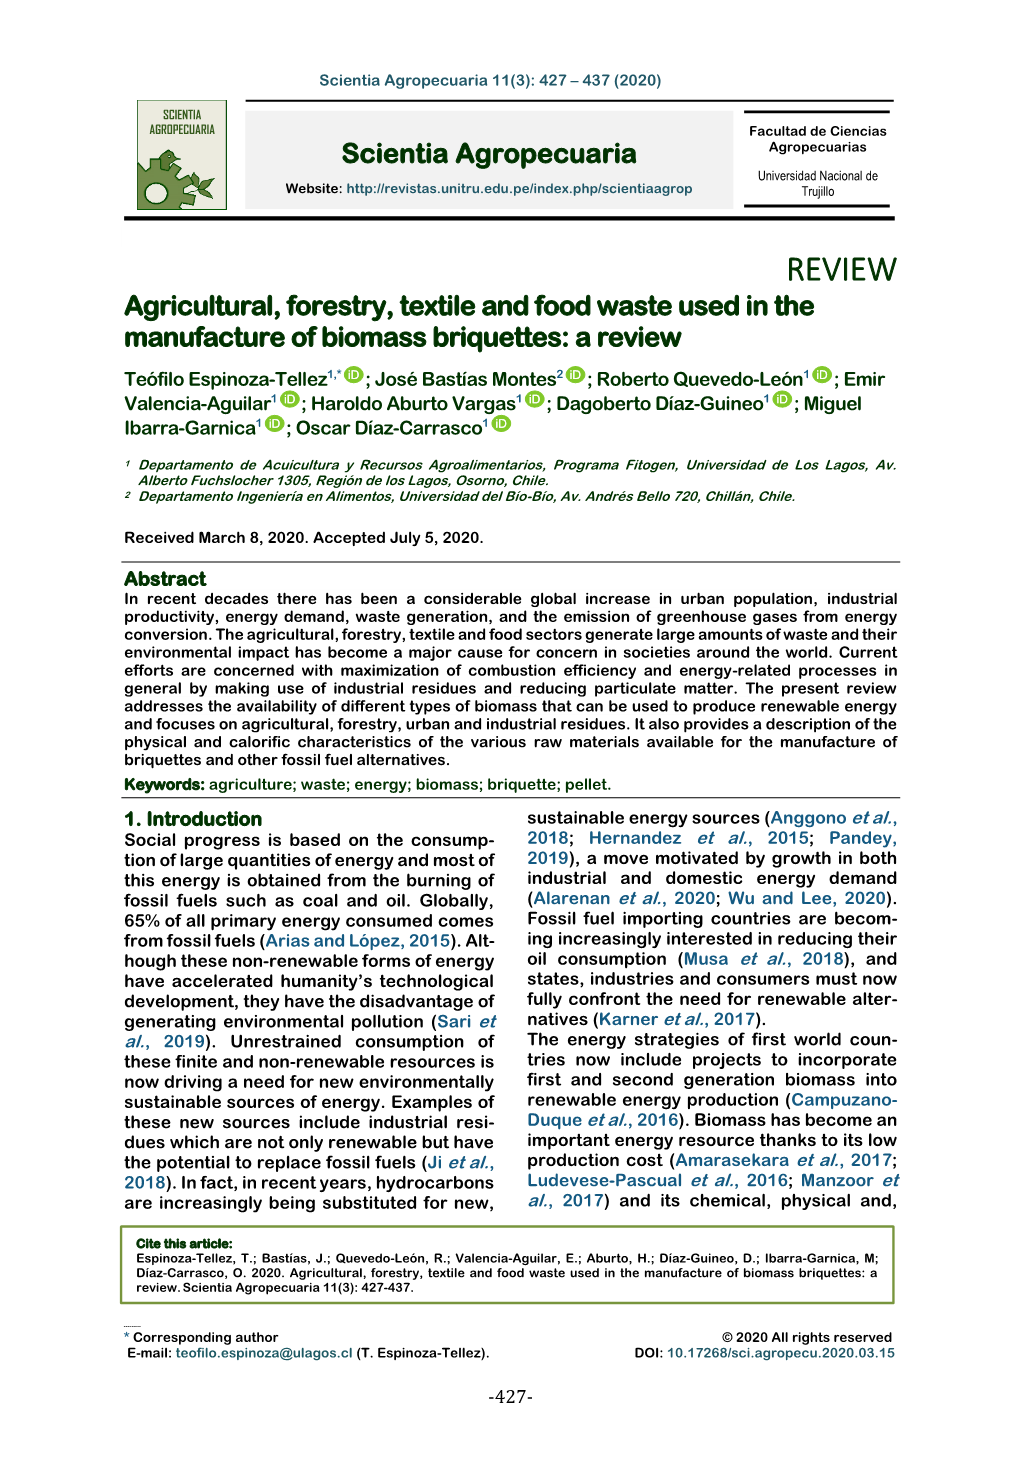 REVIEW Agricultural, Forestry, Textile and Food Waste Used in the Manufacture of Biomass Briquettes: a Review